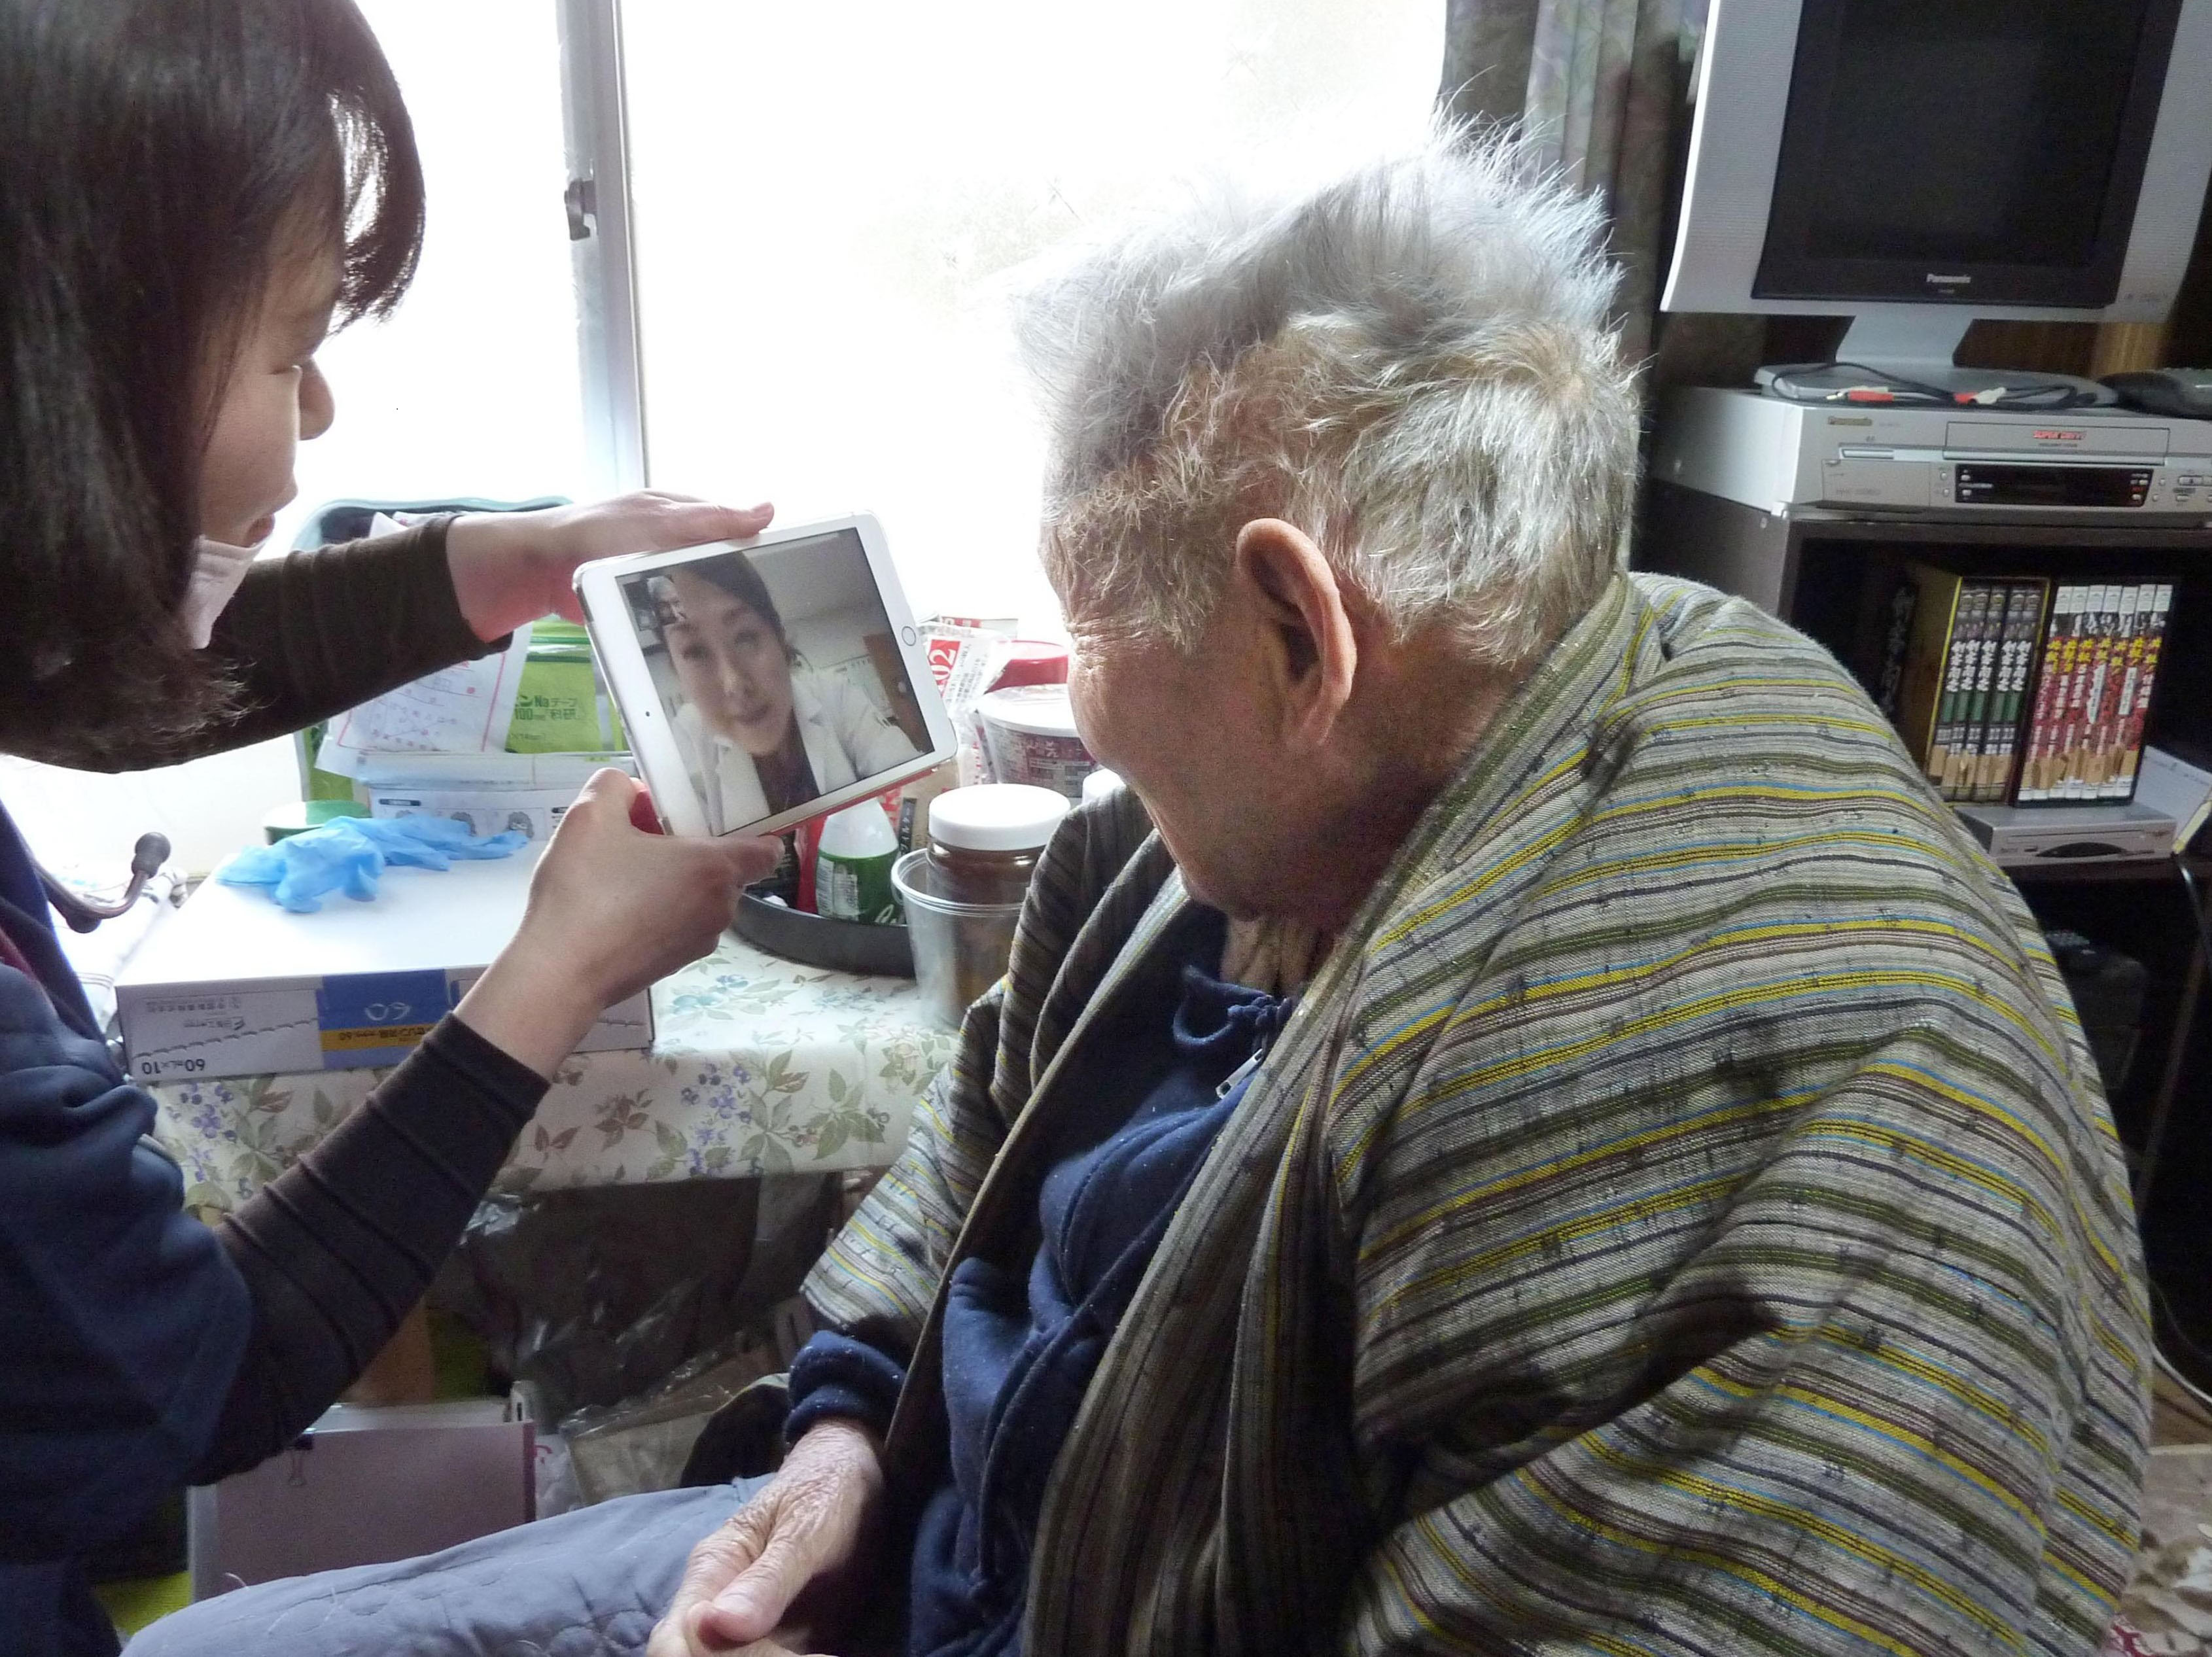 Patient Akira Fujisawa talks with his doctor via video link using a tablet computer at his home in Takamatsu, Kagawa Prefecture, on March 1. | KYODO